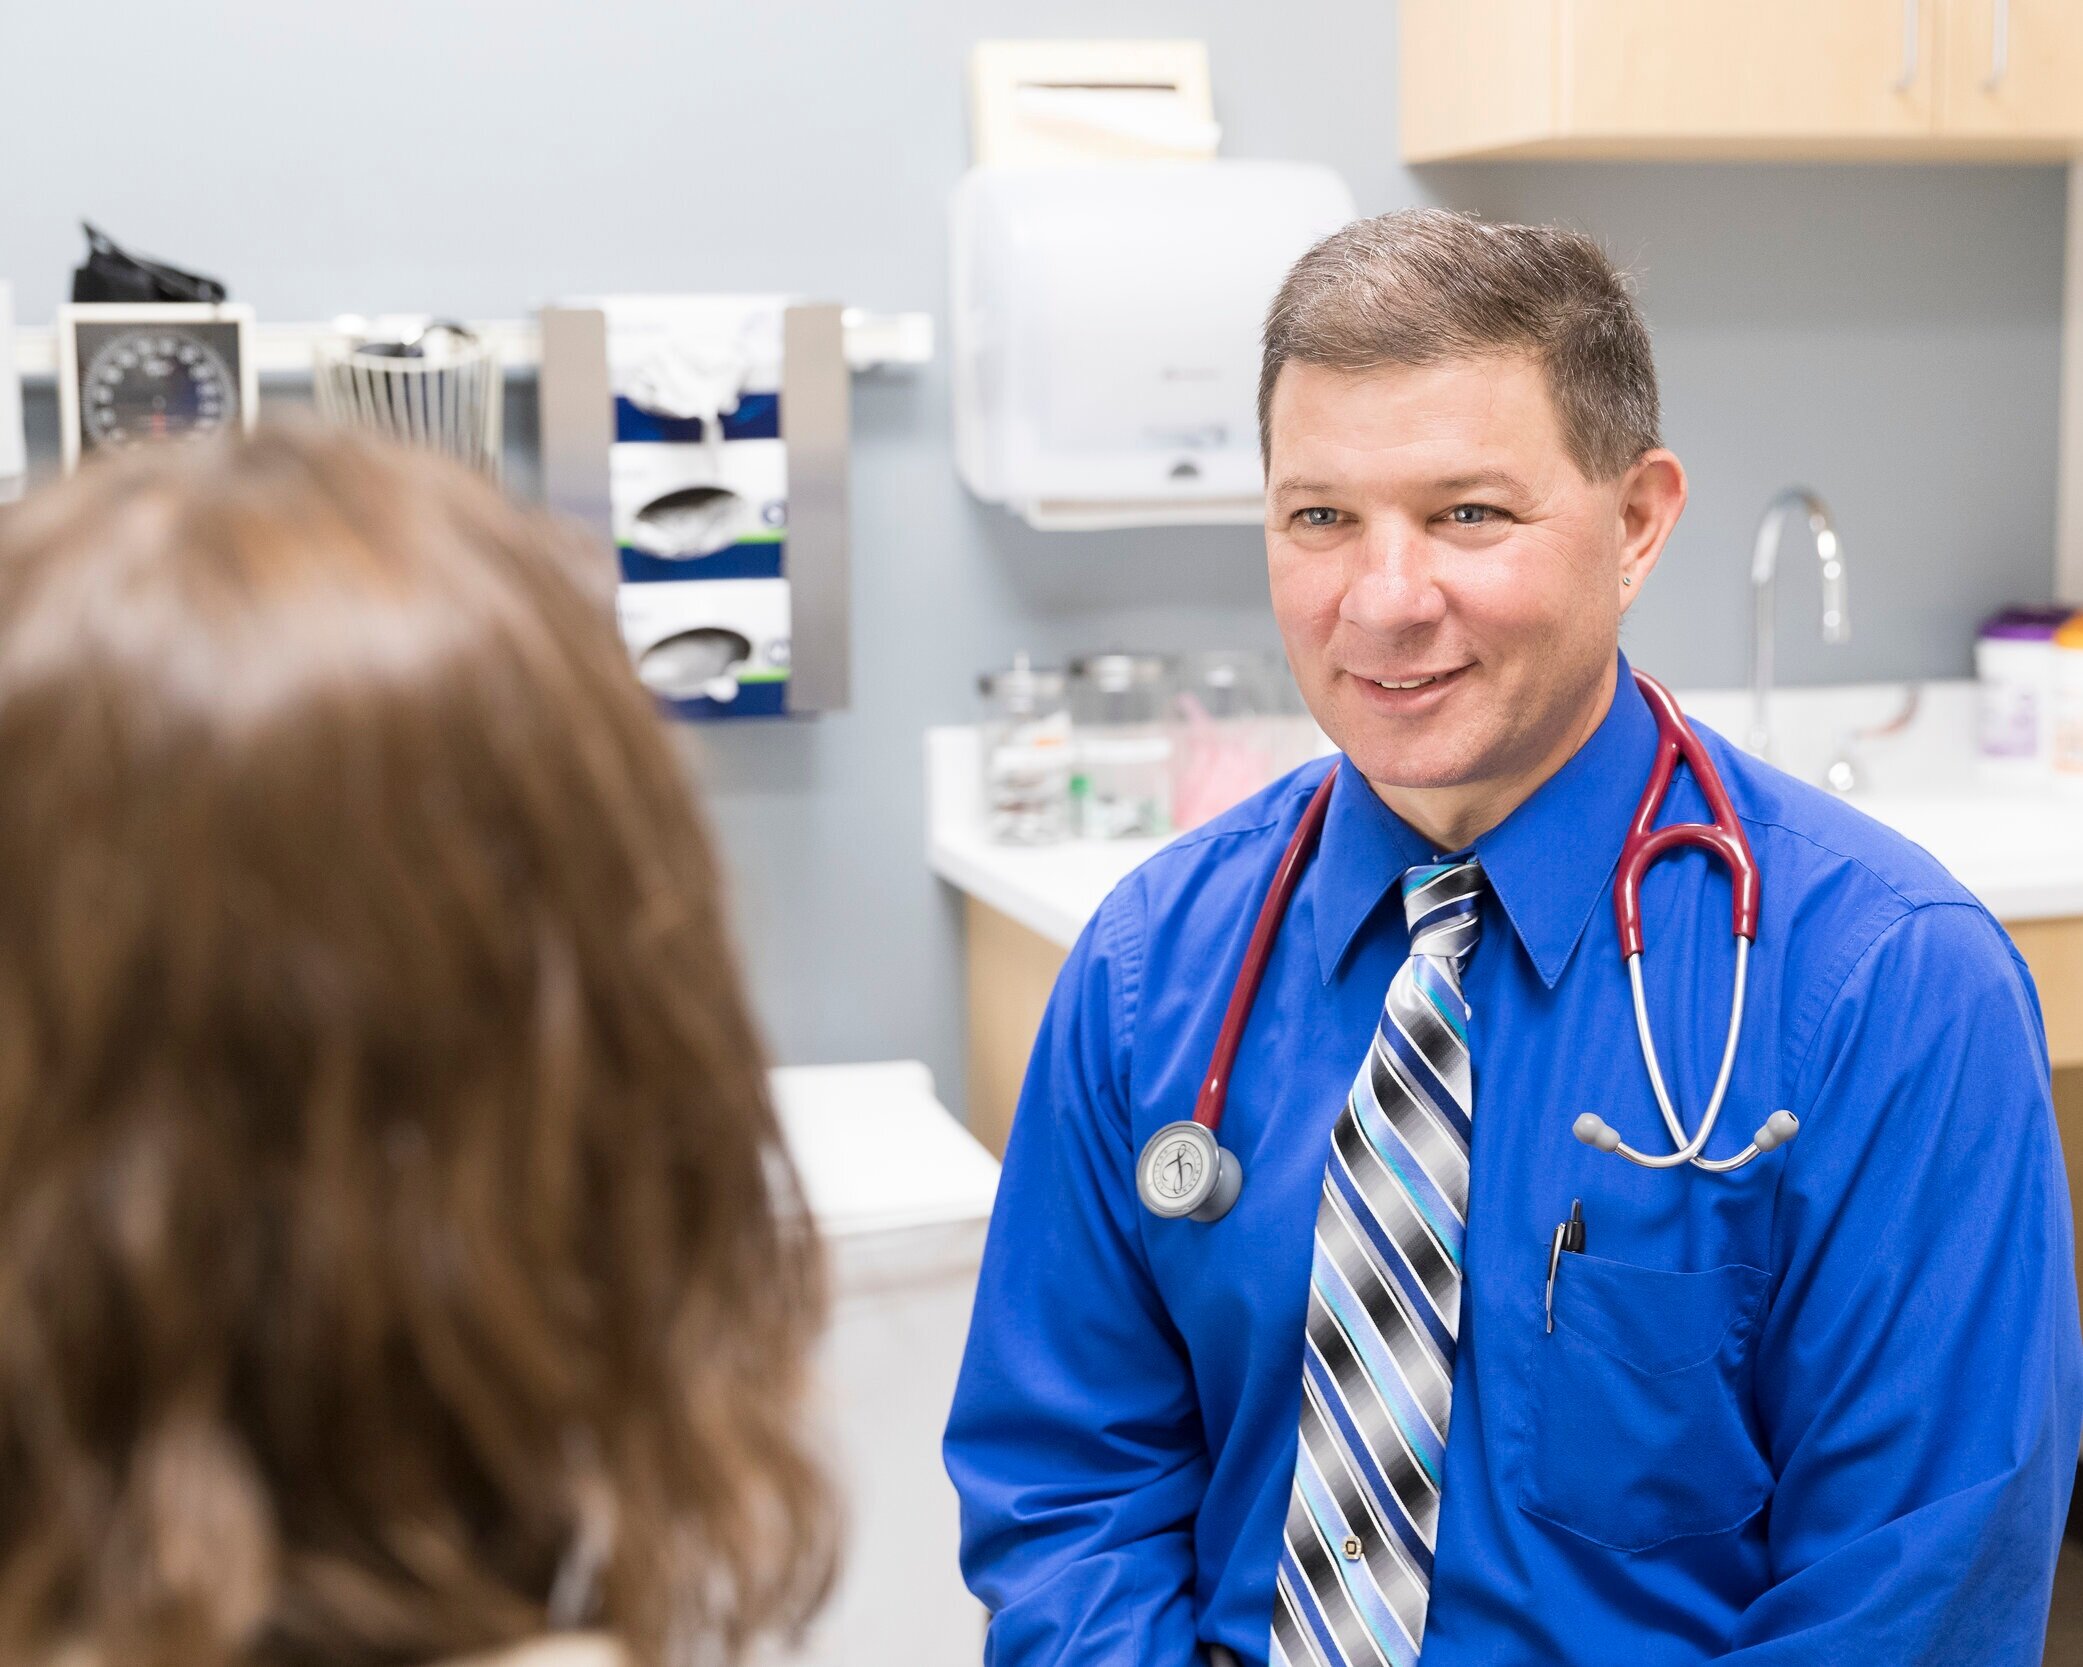 Living Well Family Medicine Dr. Eric Gerchman to open new practice in